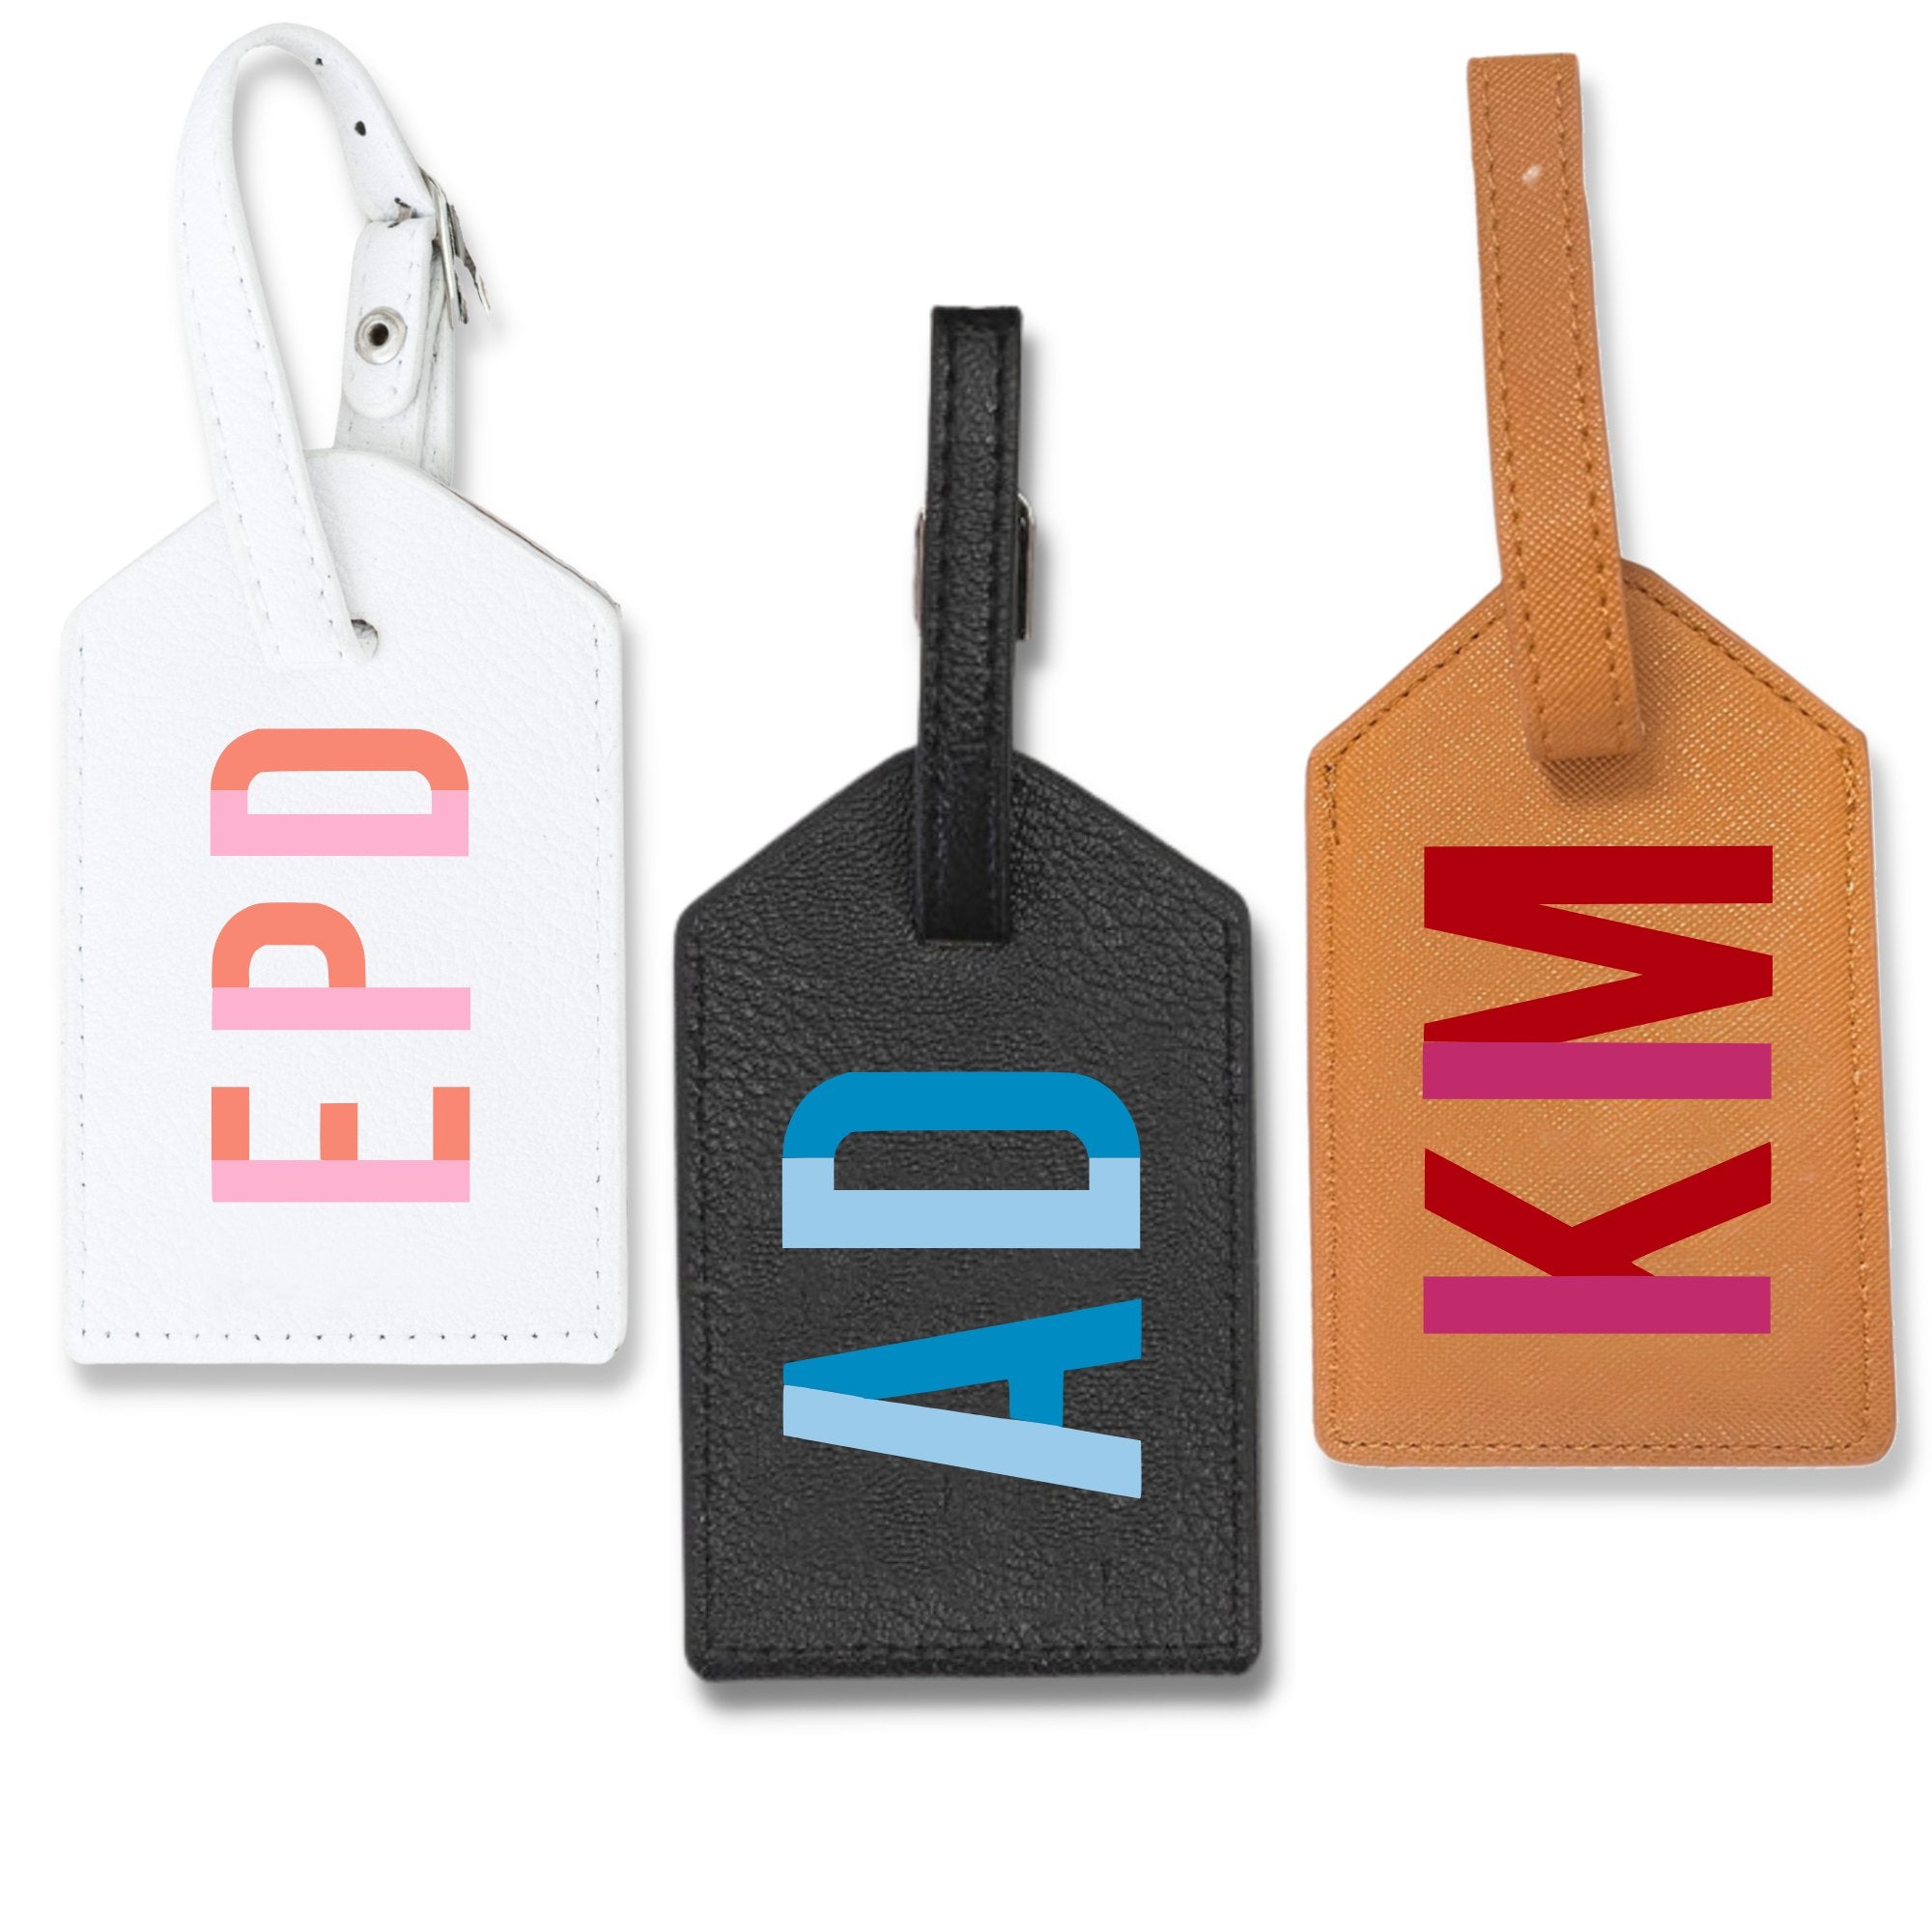 A group of leather luggage tags are customized with colorful monograms.